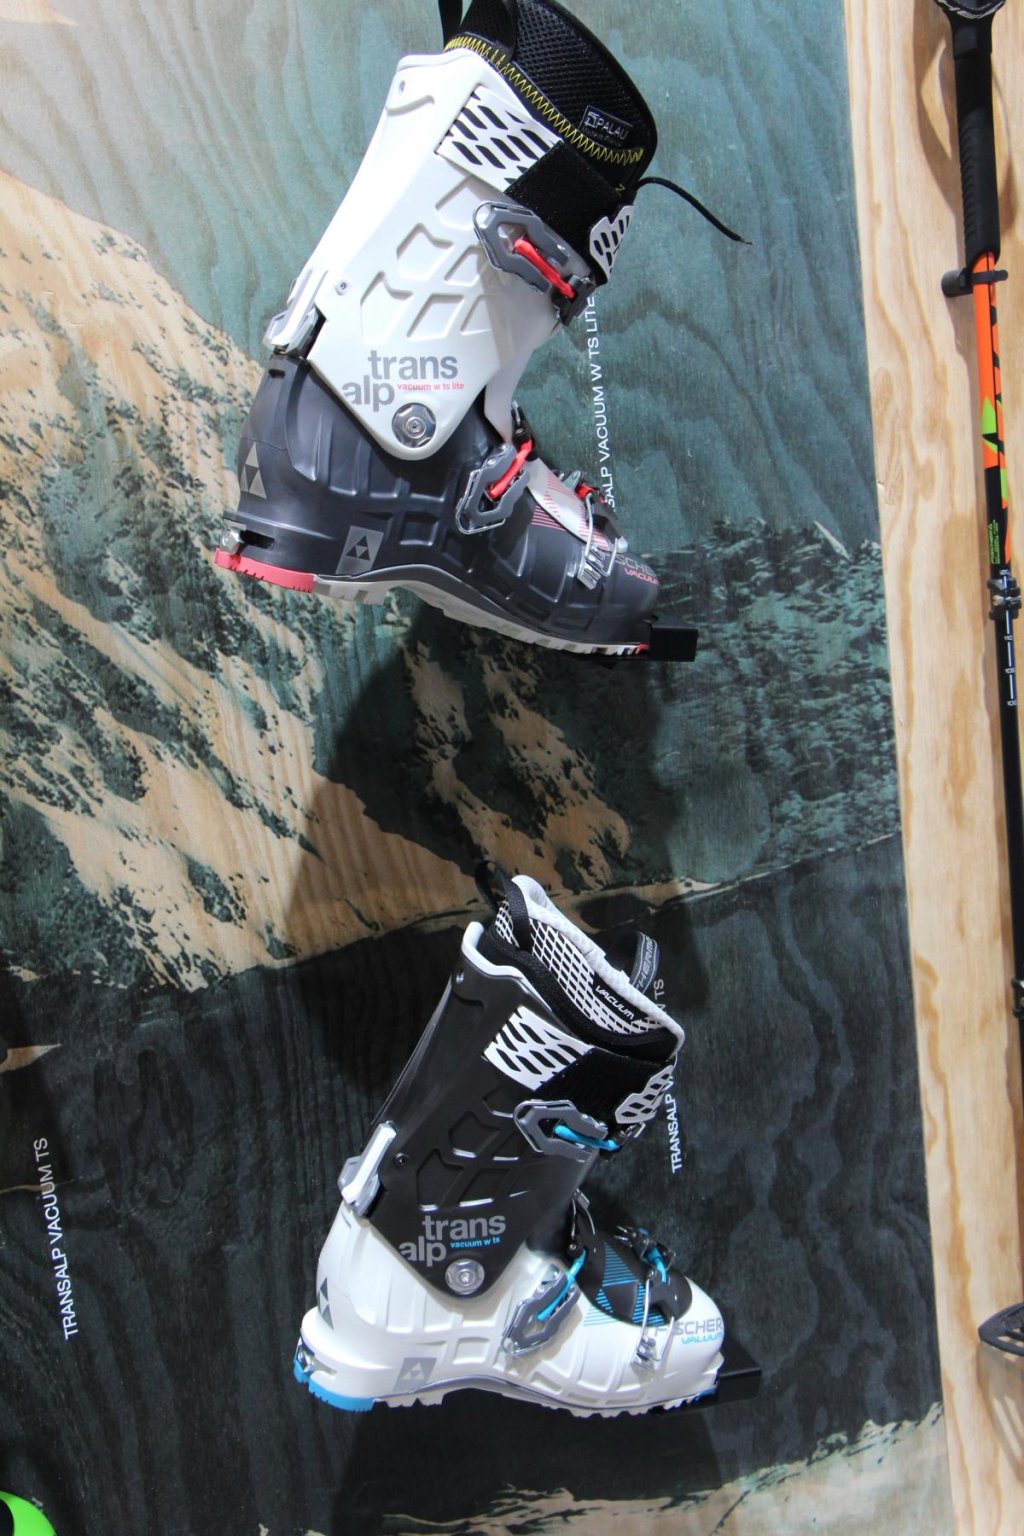 With the Transalp series (2 men's and 2 women's models), Fischer is bringing out ski touring boots with a shell that can be molded using Vacuum technology.